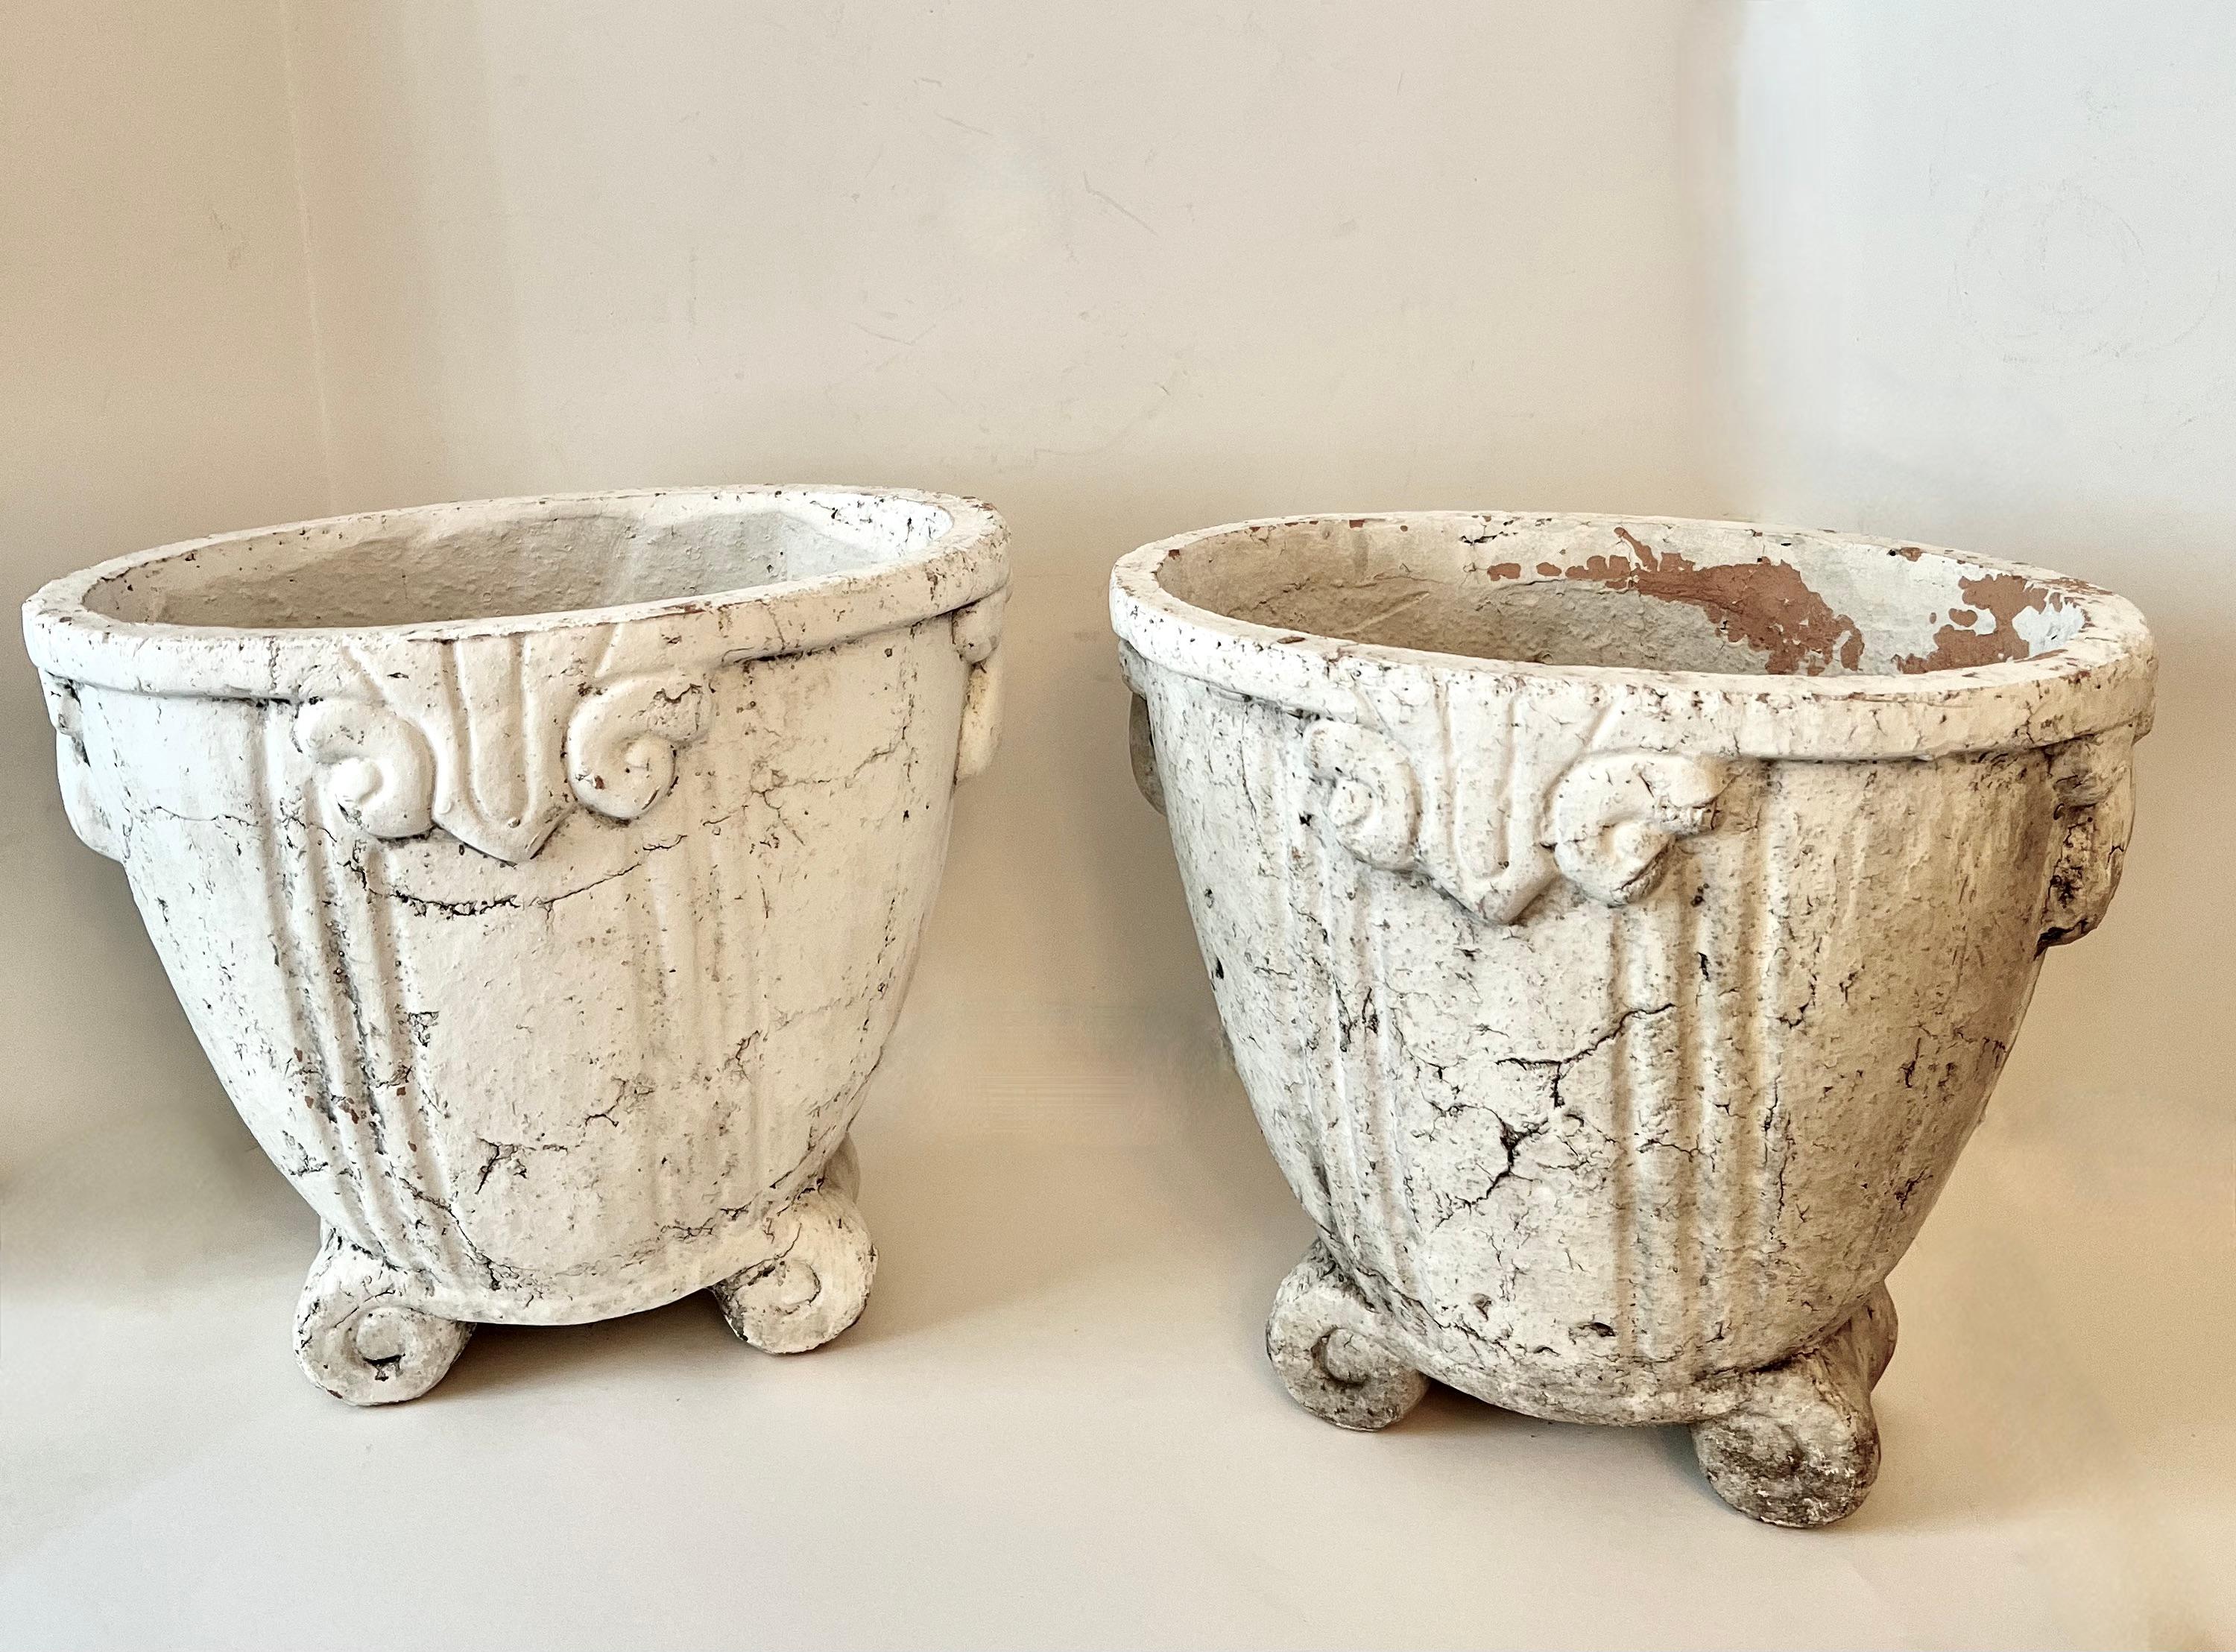 A pair of French terracotta planters or jardinieres.  The pair were painted some time ago and have a wonderful patina.  They look to have an art deco pattern and would be a compliment to an entry to a home or the garden.  

They would make lovely